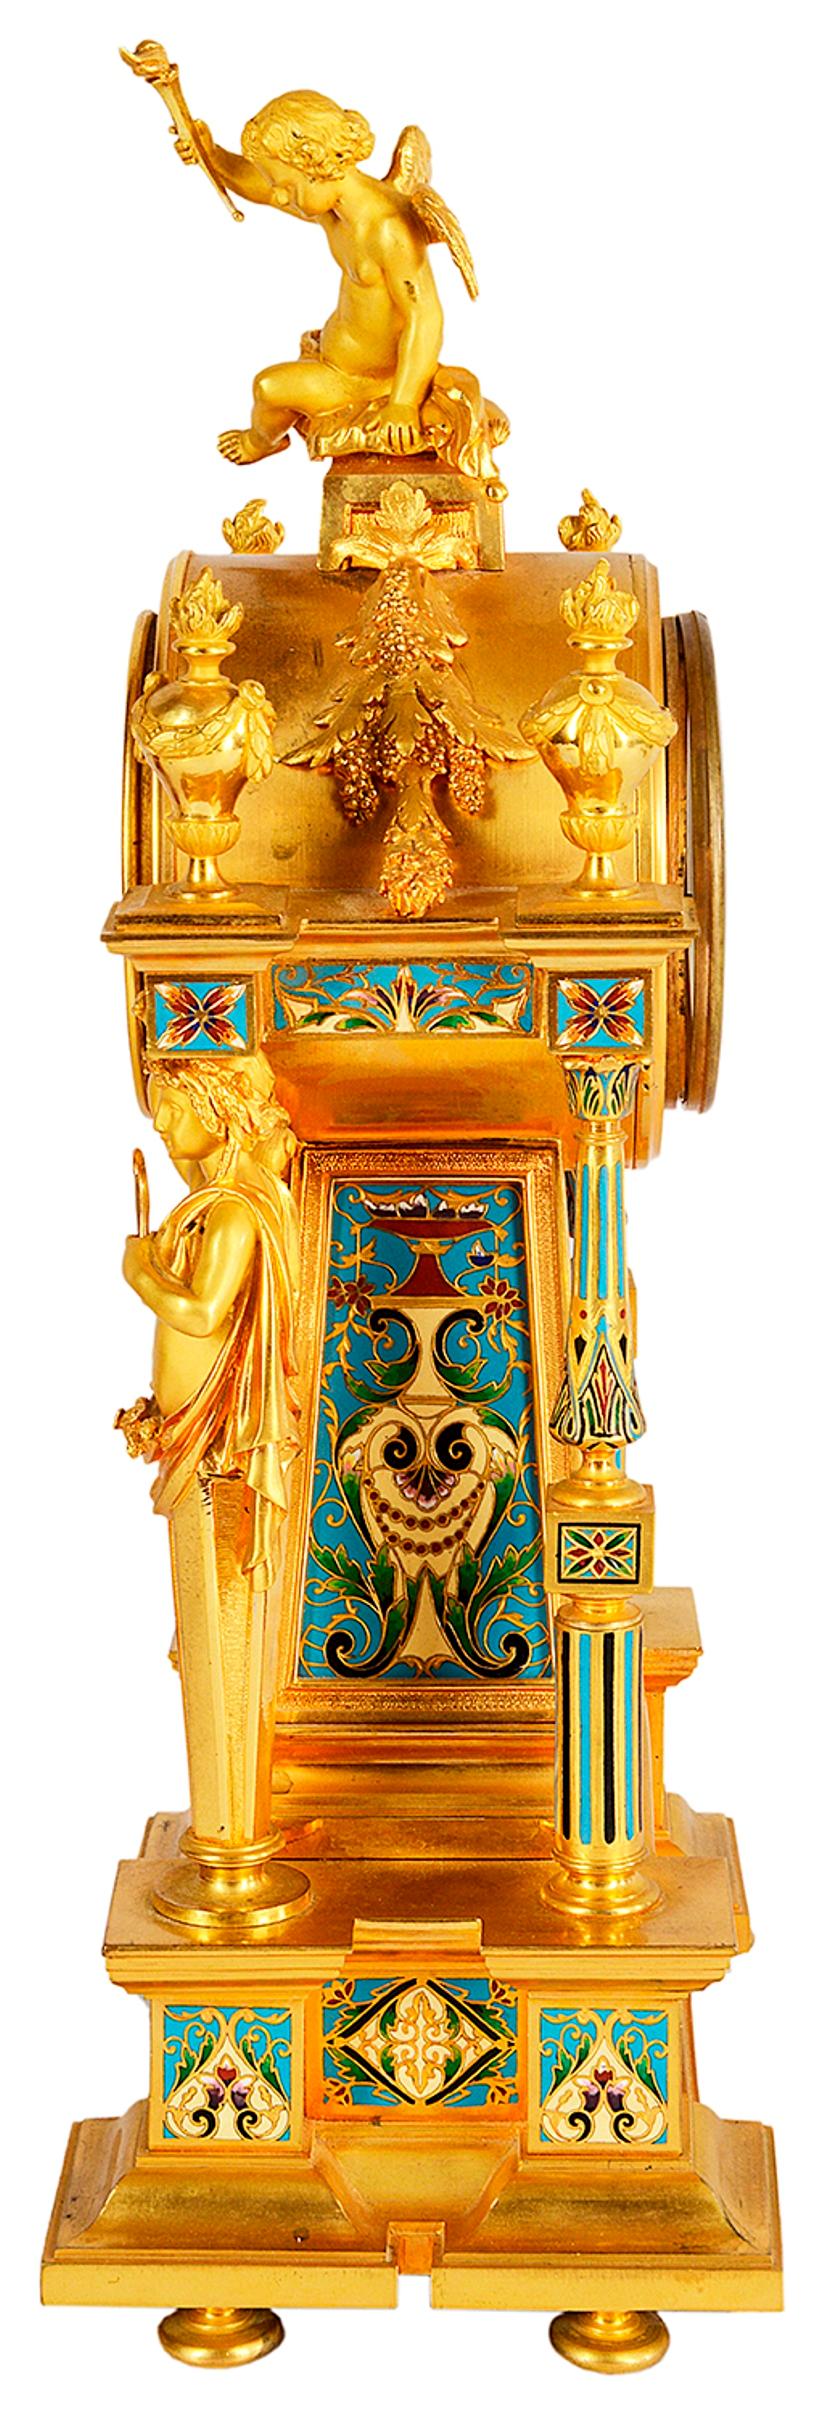 A very good quality French late 19th century gilded ormolu and champleve enamel mantel (fireplace) clock. Having urns and a cherub above the eight day clock that chimes on the hour and half hour. Supported by monopodia figures to either side of the